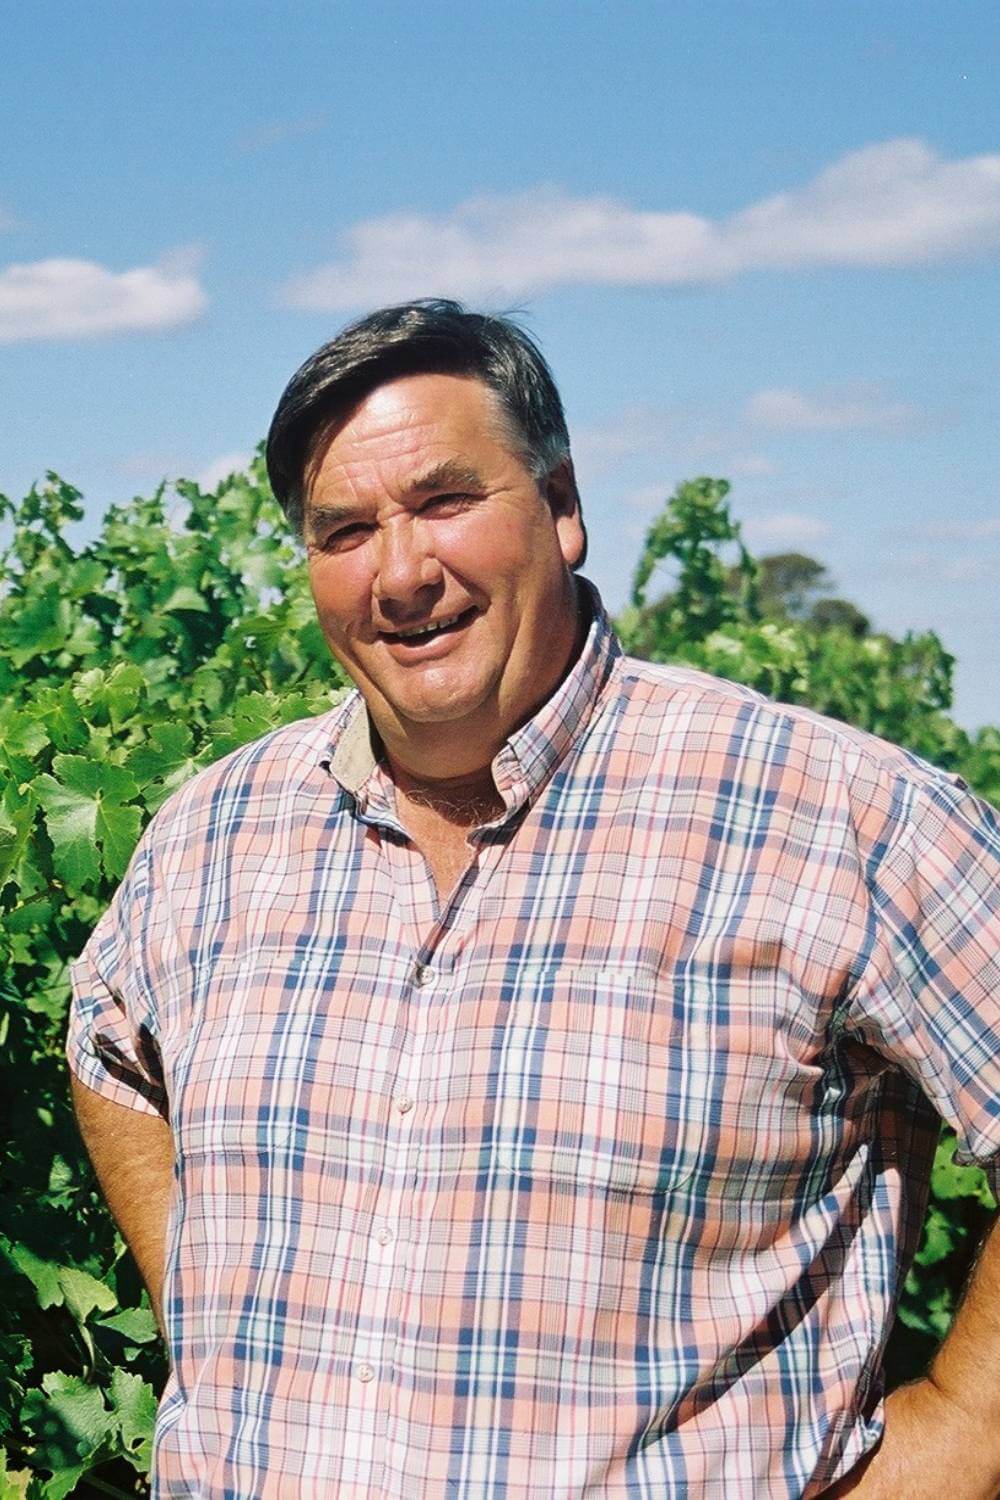 Peter Douglas who hand selects the grapes for our Daisies & Dandelions Chardonnay